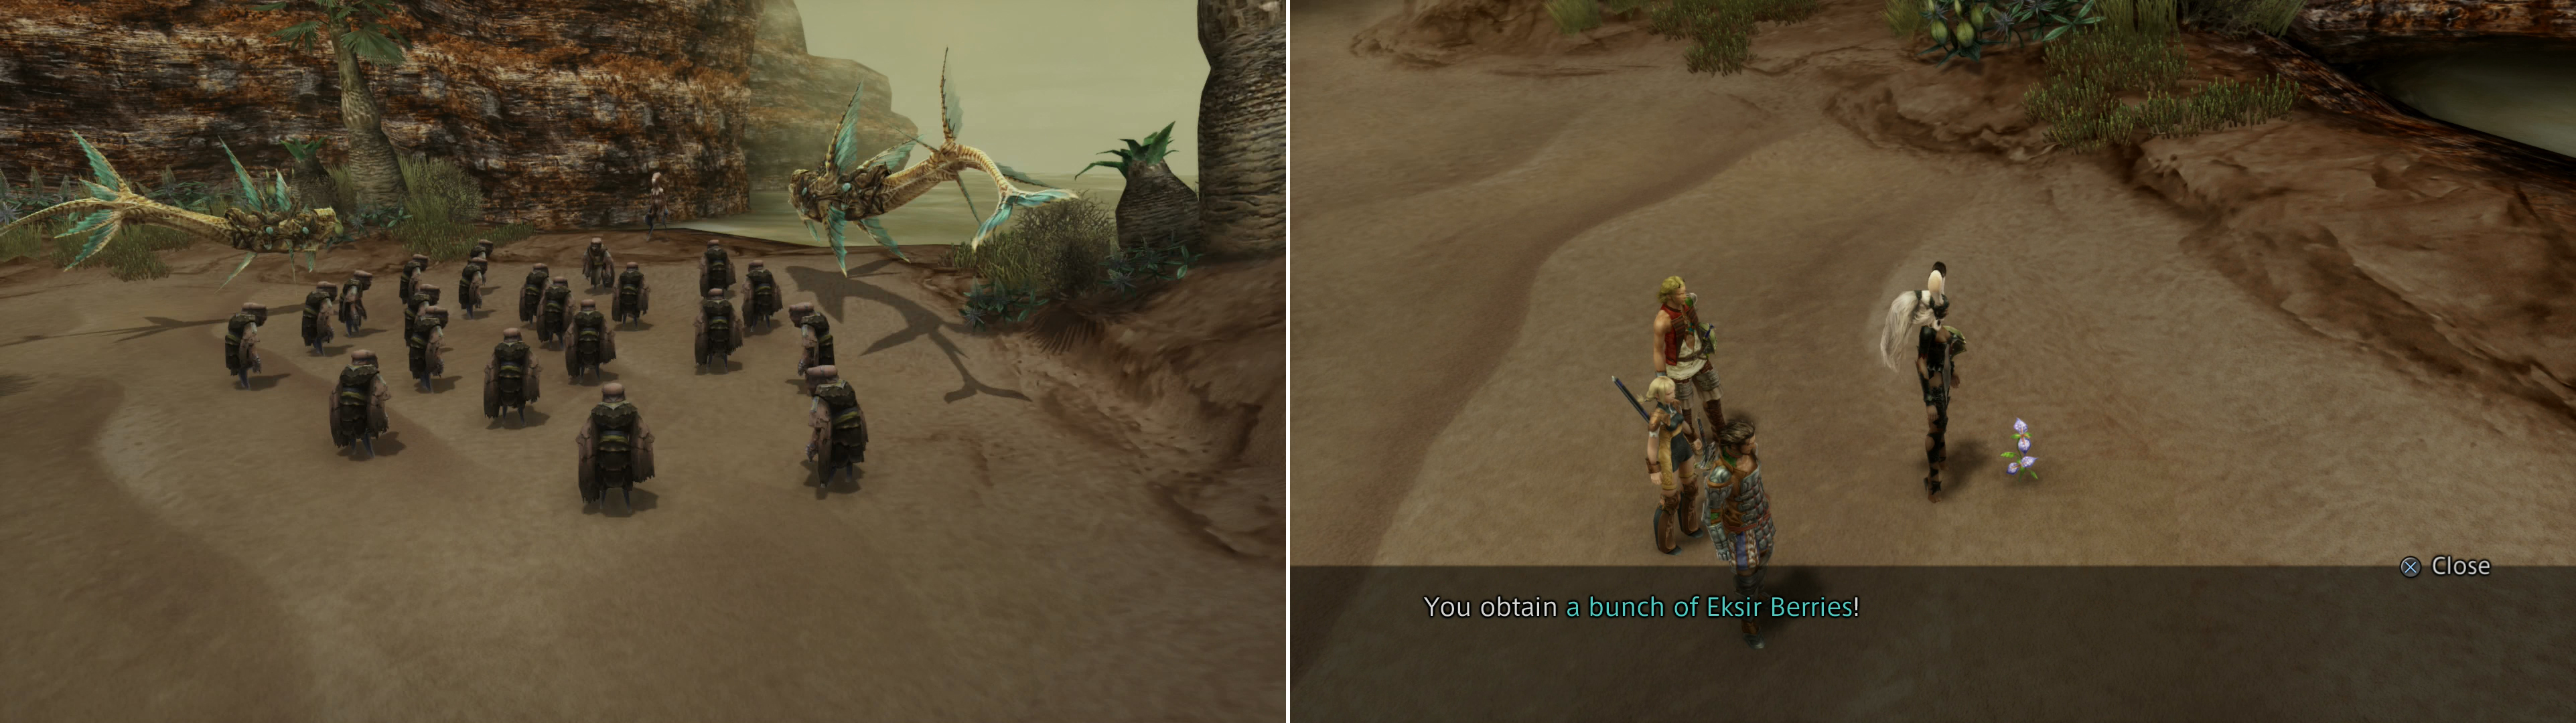 Chase down the Urutan who has your reward (left) and after his trial pick loot some Eksir Berries (right).